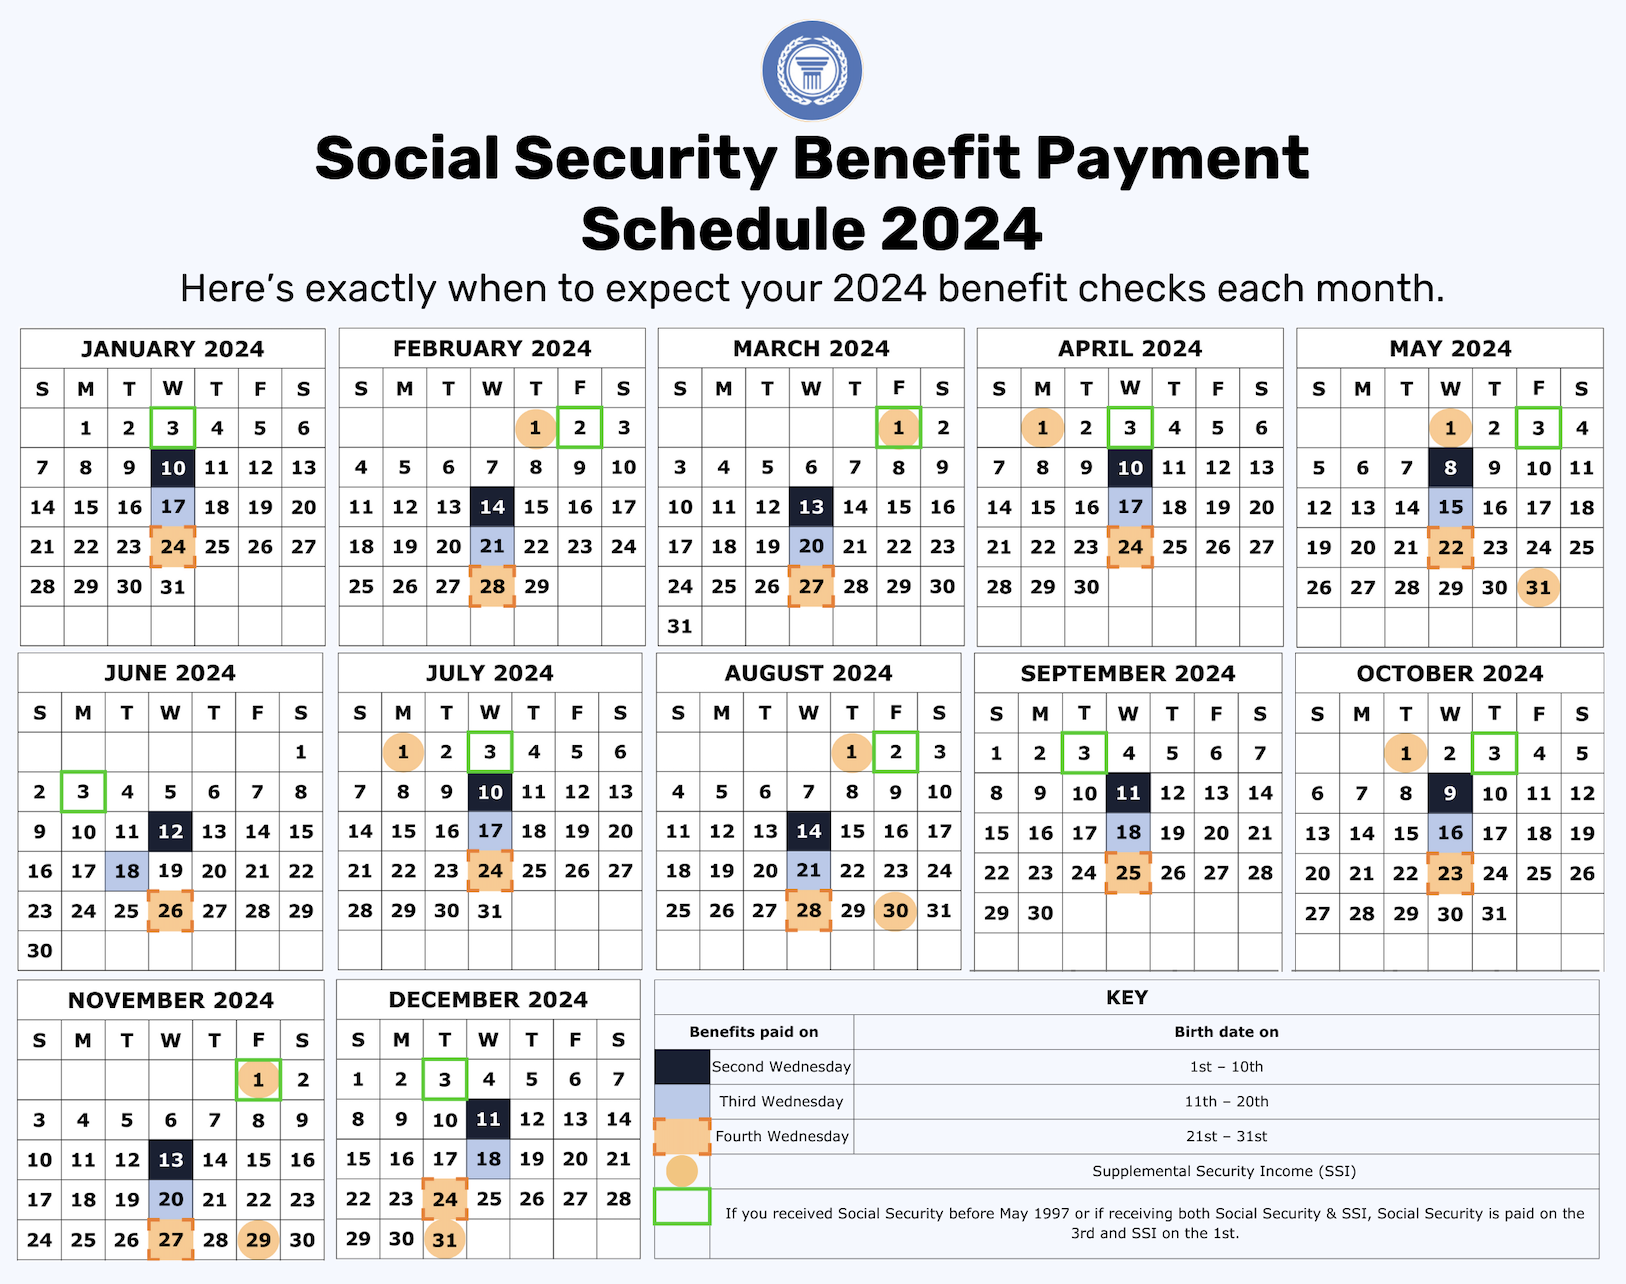 Social Security Benefits Payment Schedule 2024